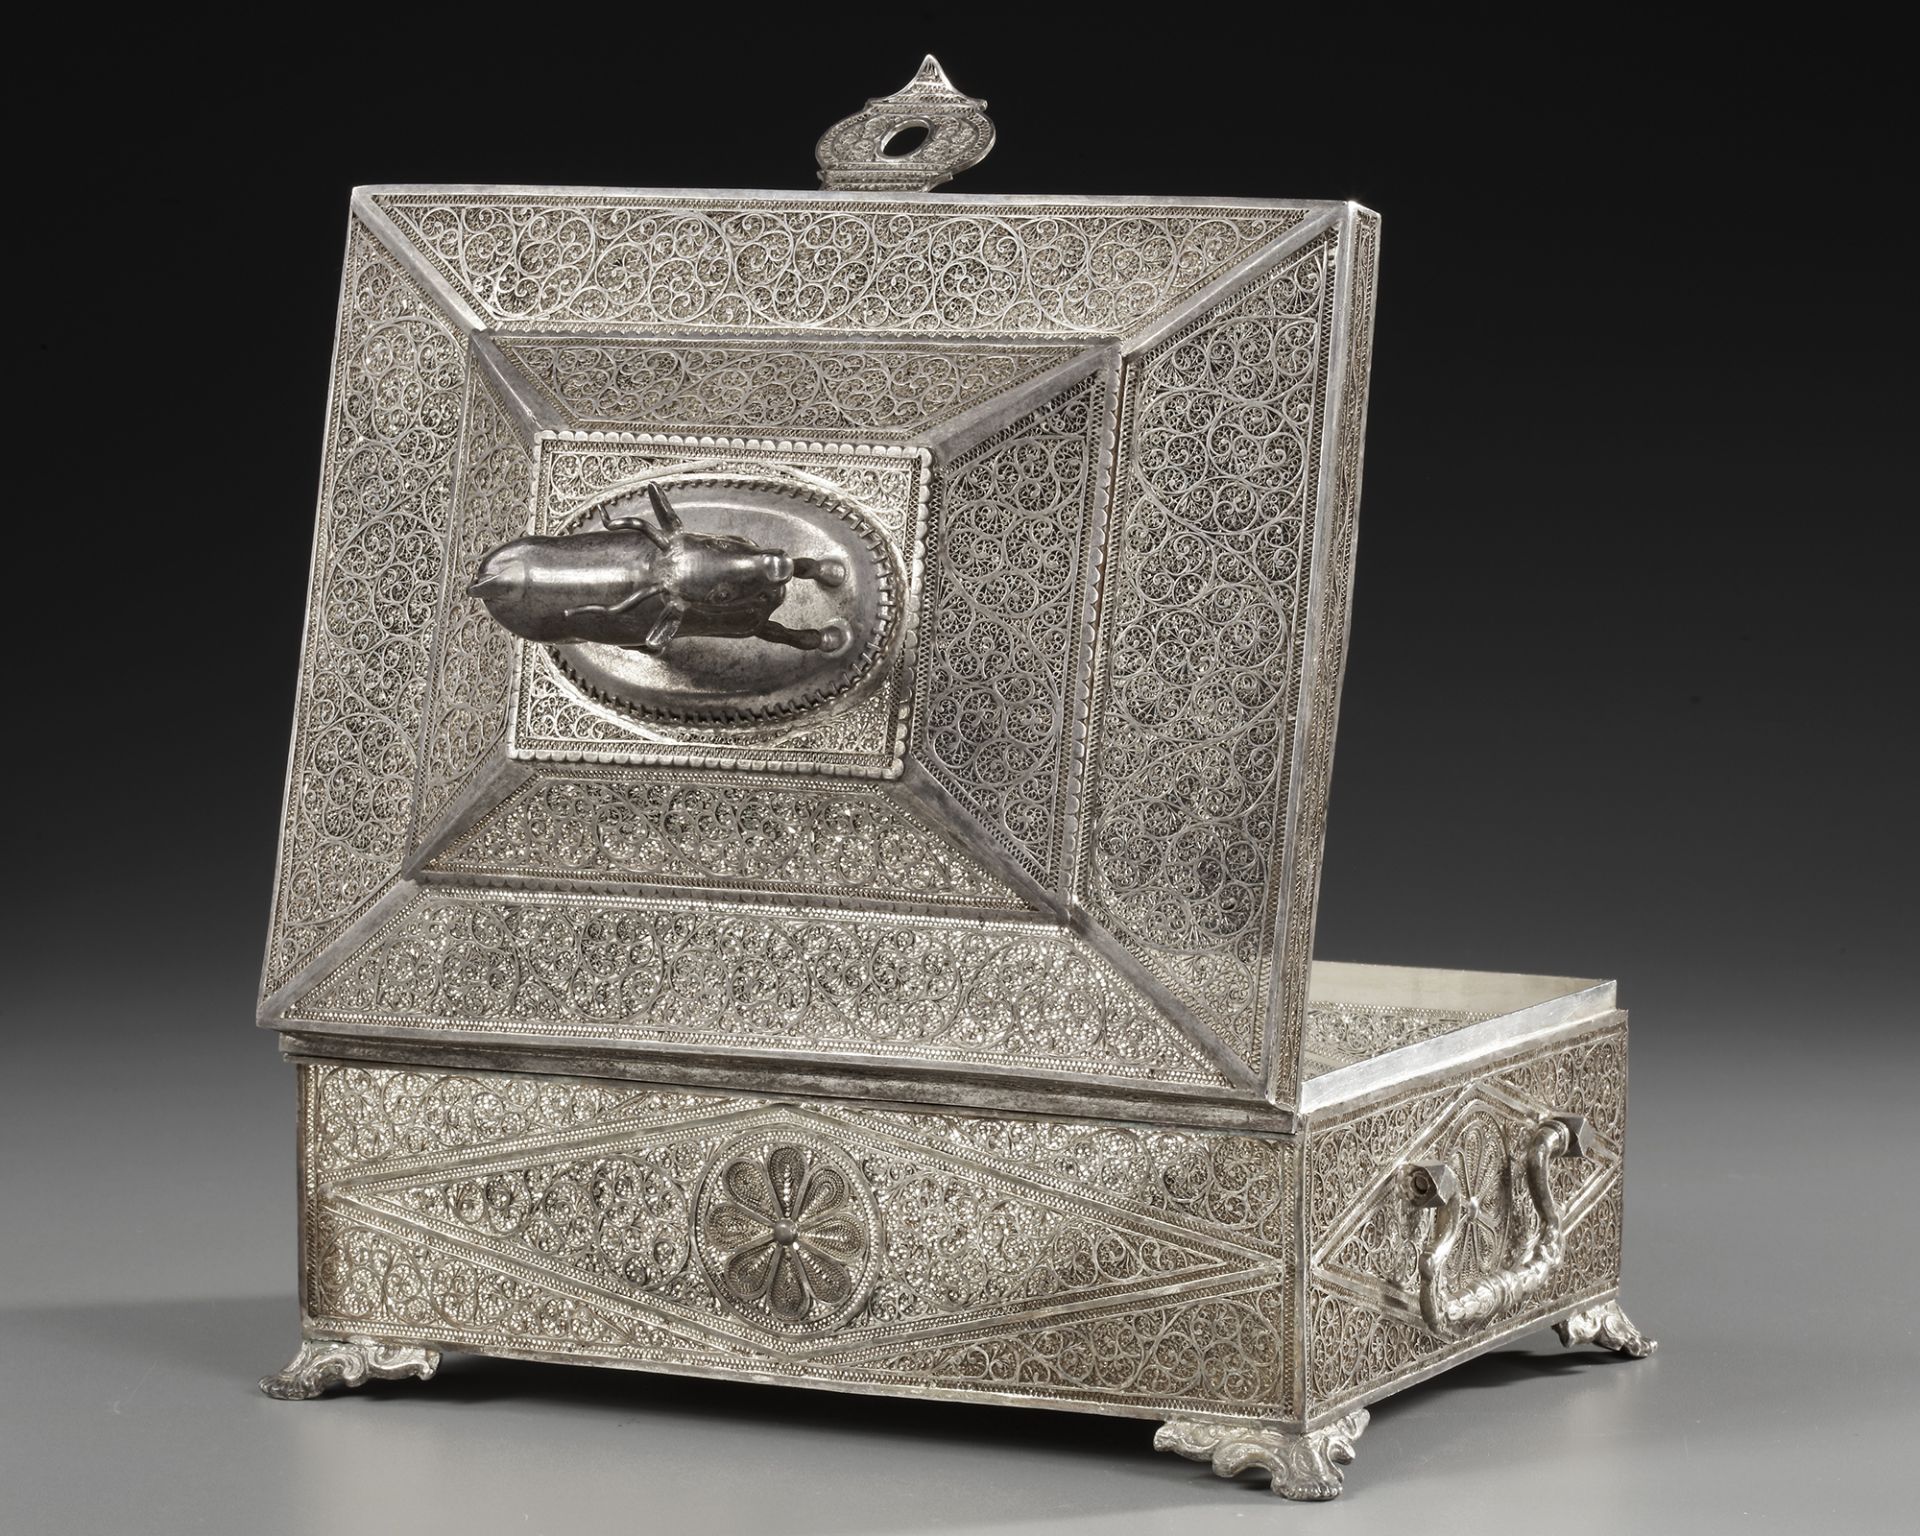 AN OTTOMAN SILVER FILIGREE CASKET, 19TH CENTURY - Image 5 of 5